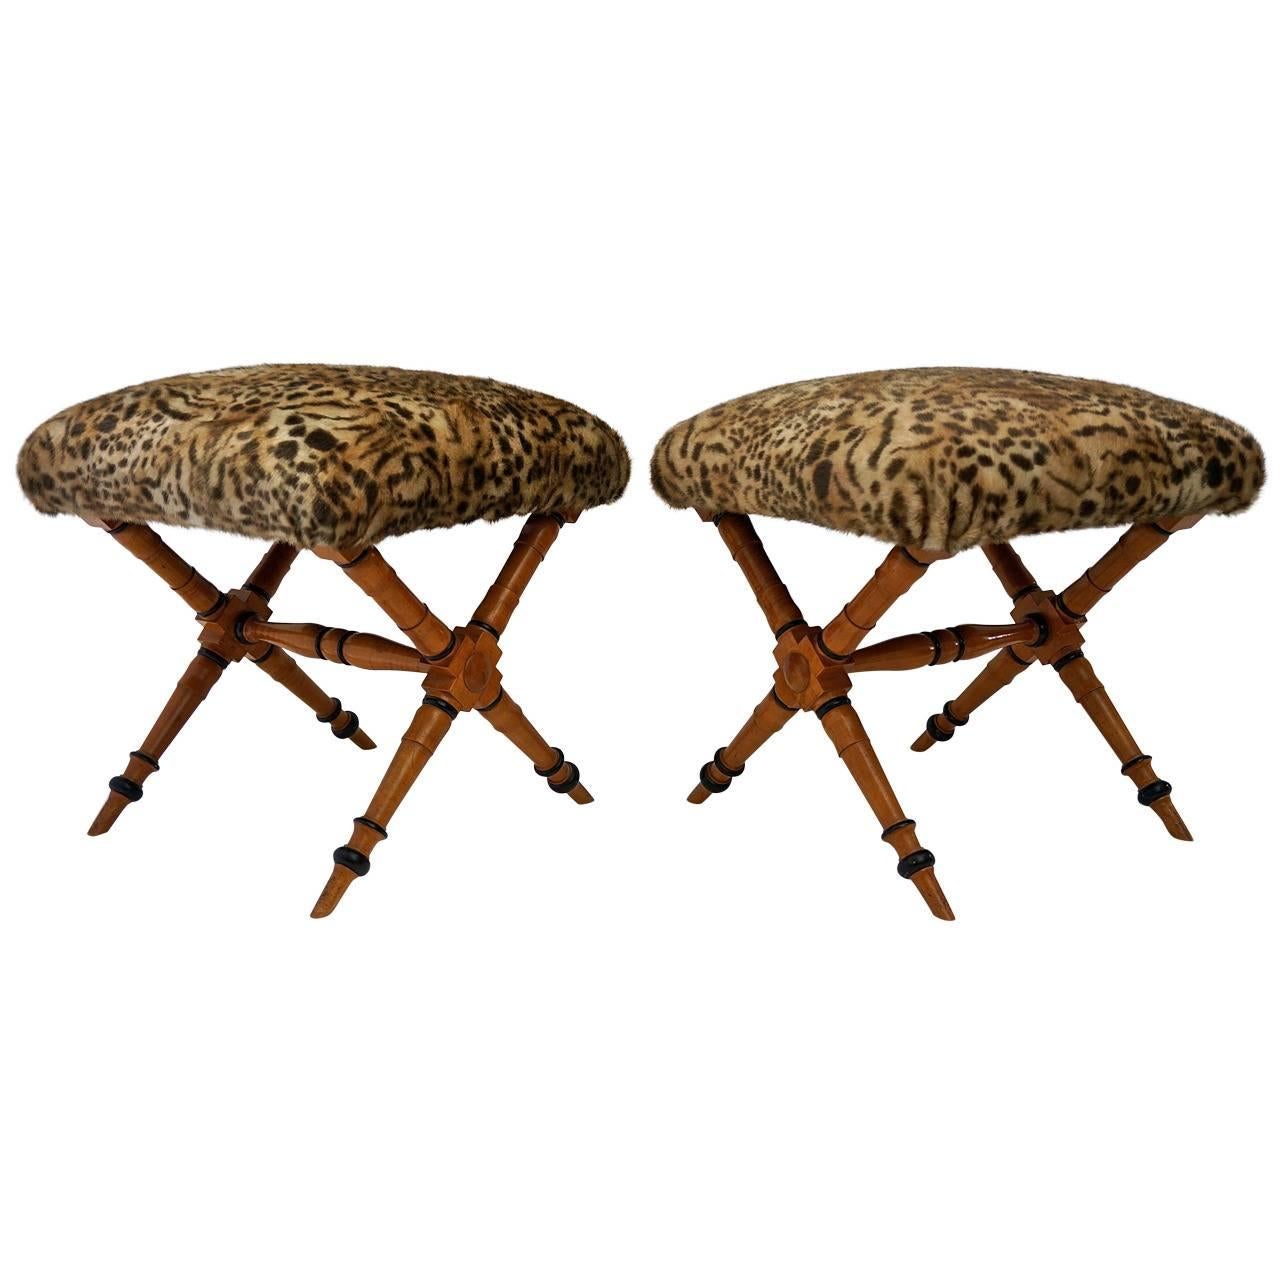 Pair of Biedermeier Style X-Stools with Faux Fur Upholstery